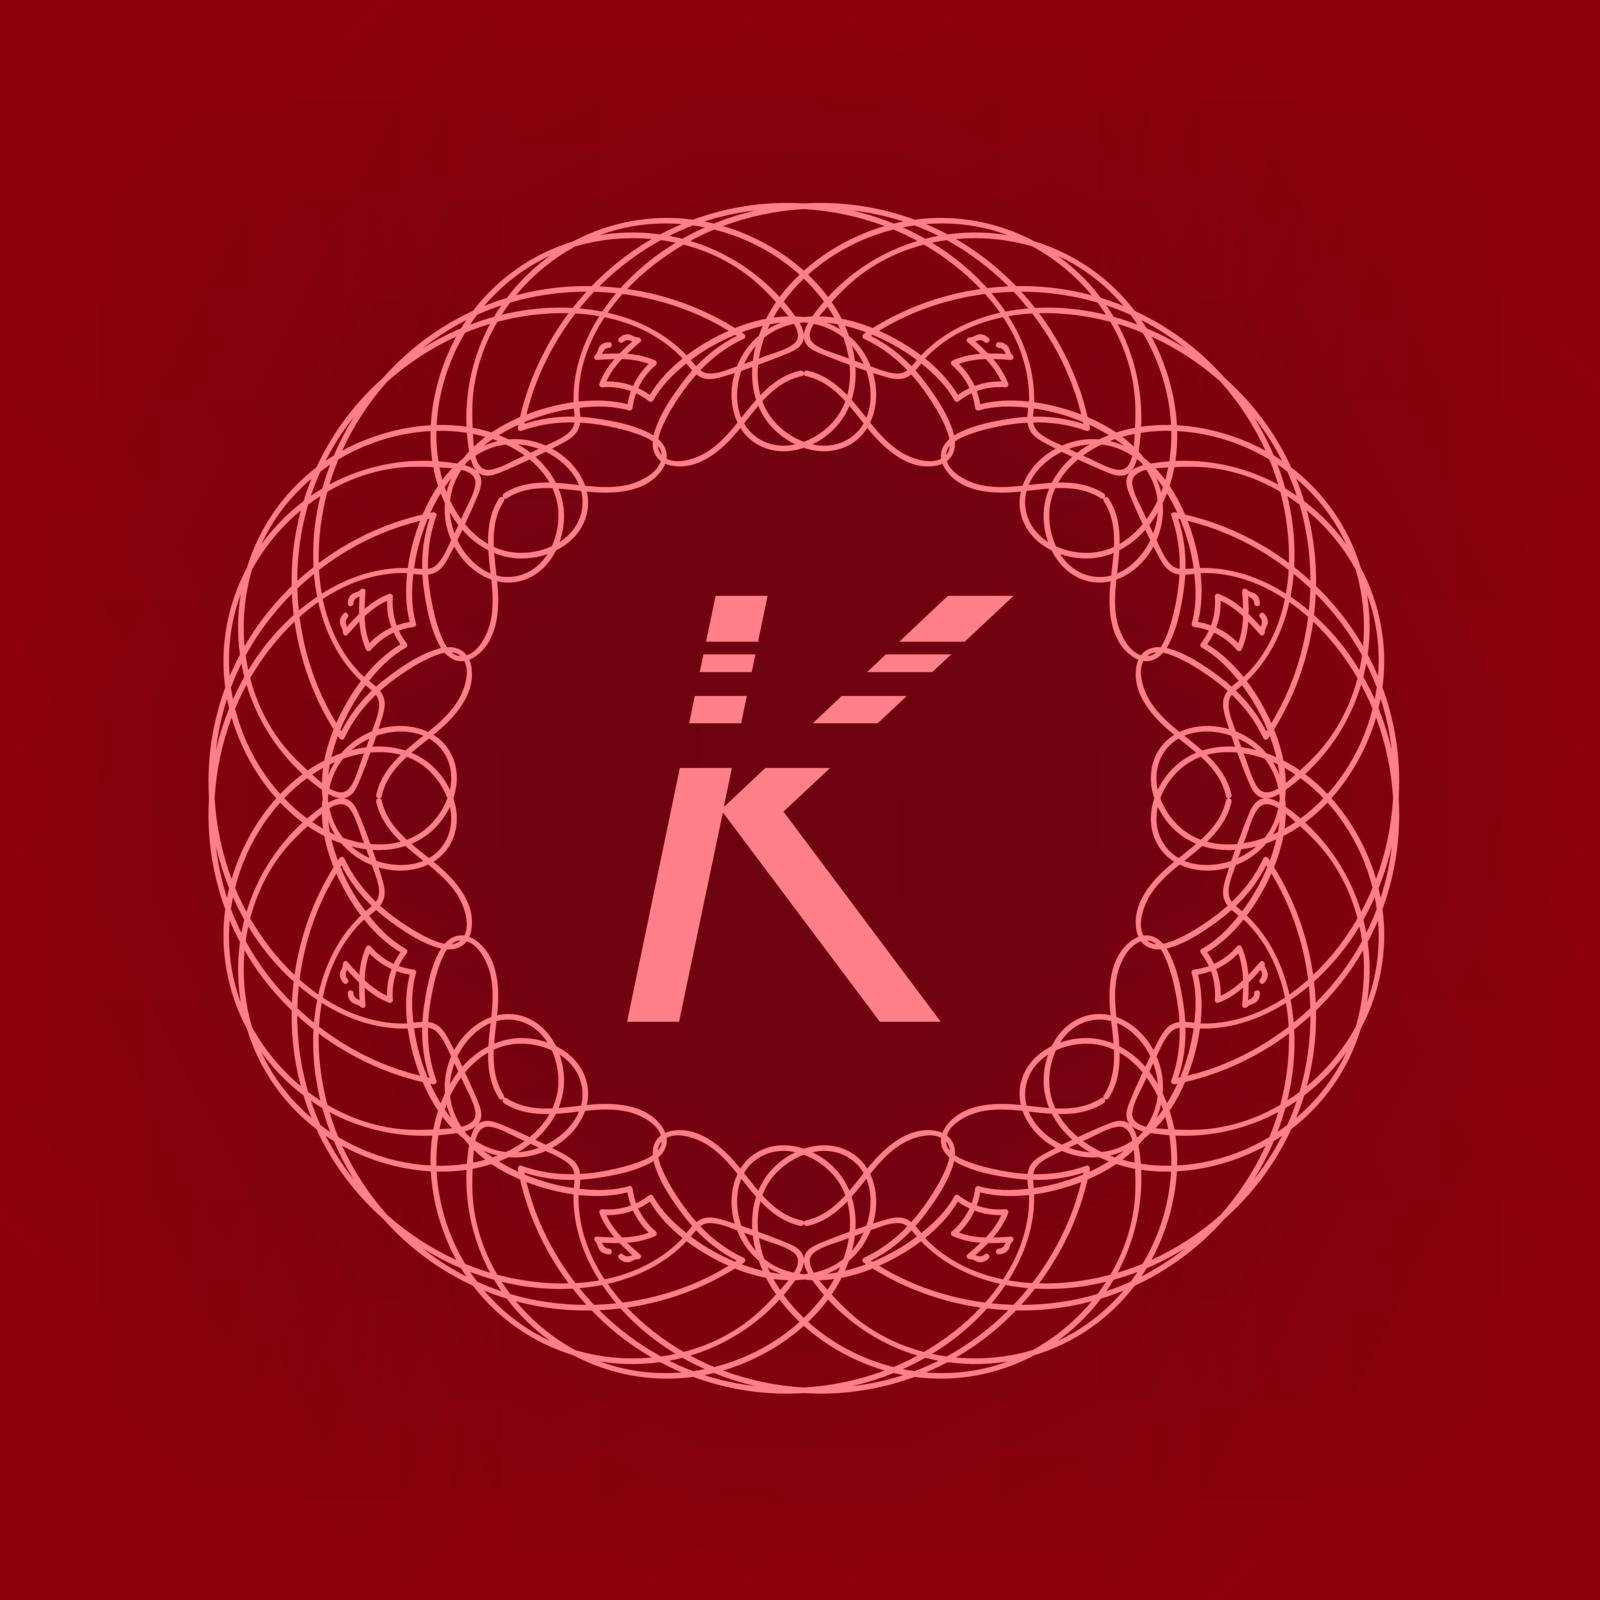 Simple  Monogram Design Template on Red Background